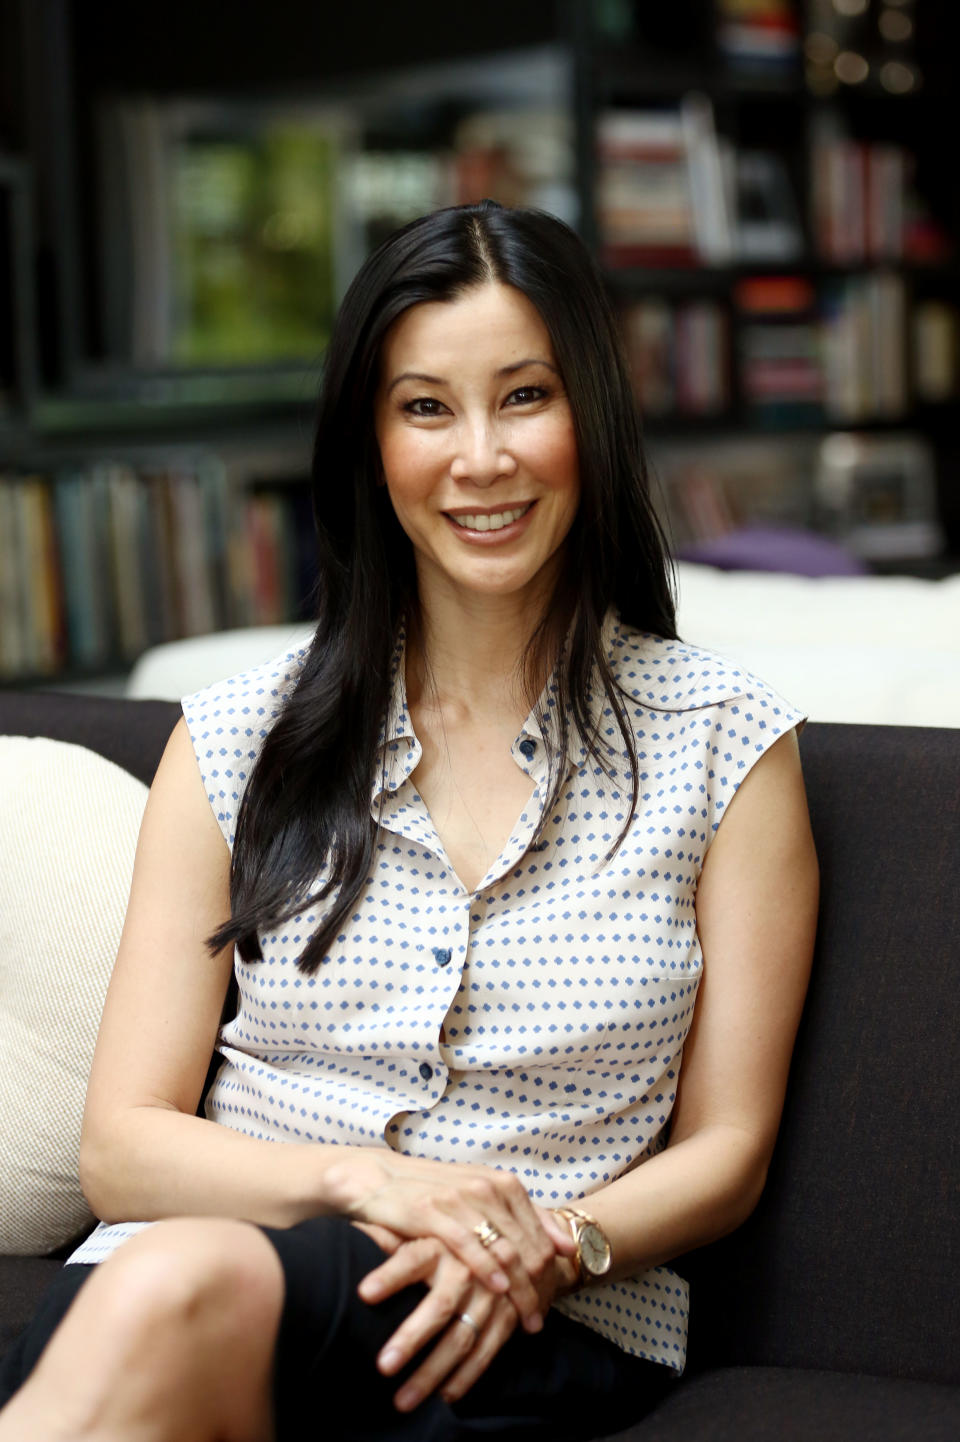 In this May 10, 2013 photo, journalist Lisa Ling, poses for a portrait in Santa Monica, Calif. After giving birth to to 9-week-old daughter Jett, Ling says she's ready to get back to work with her Dove campaign to promote girl's self-esteem and her Oprah Winfrey Network series "Our America with Lisa Ling." (Photo by Matt Sayles/Invision/AP)